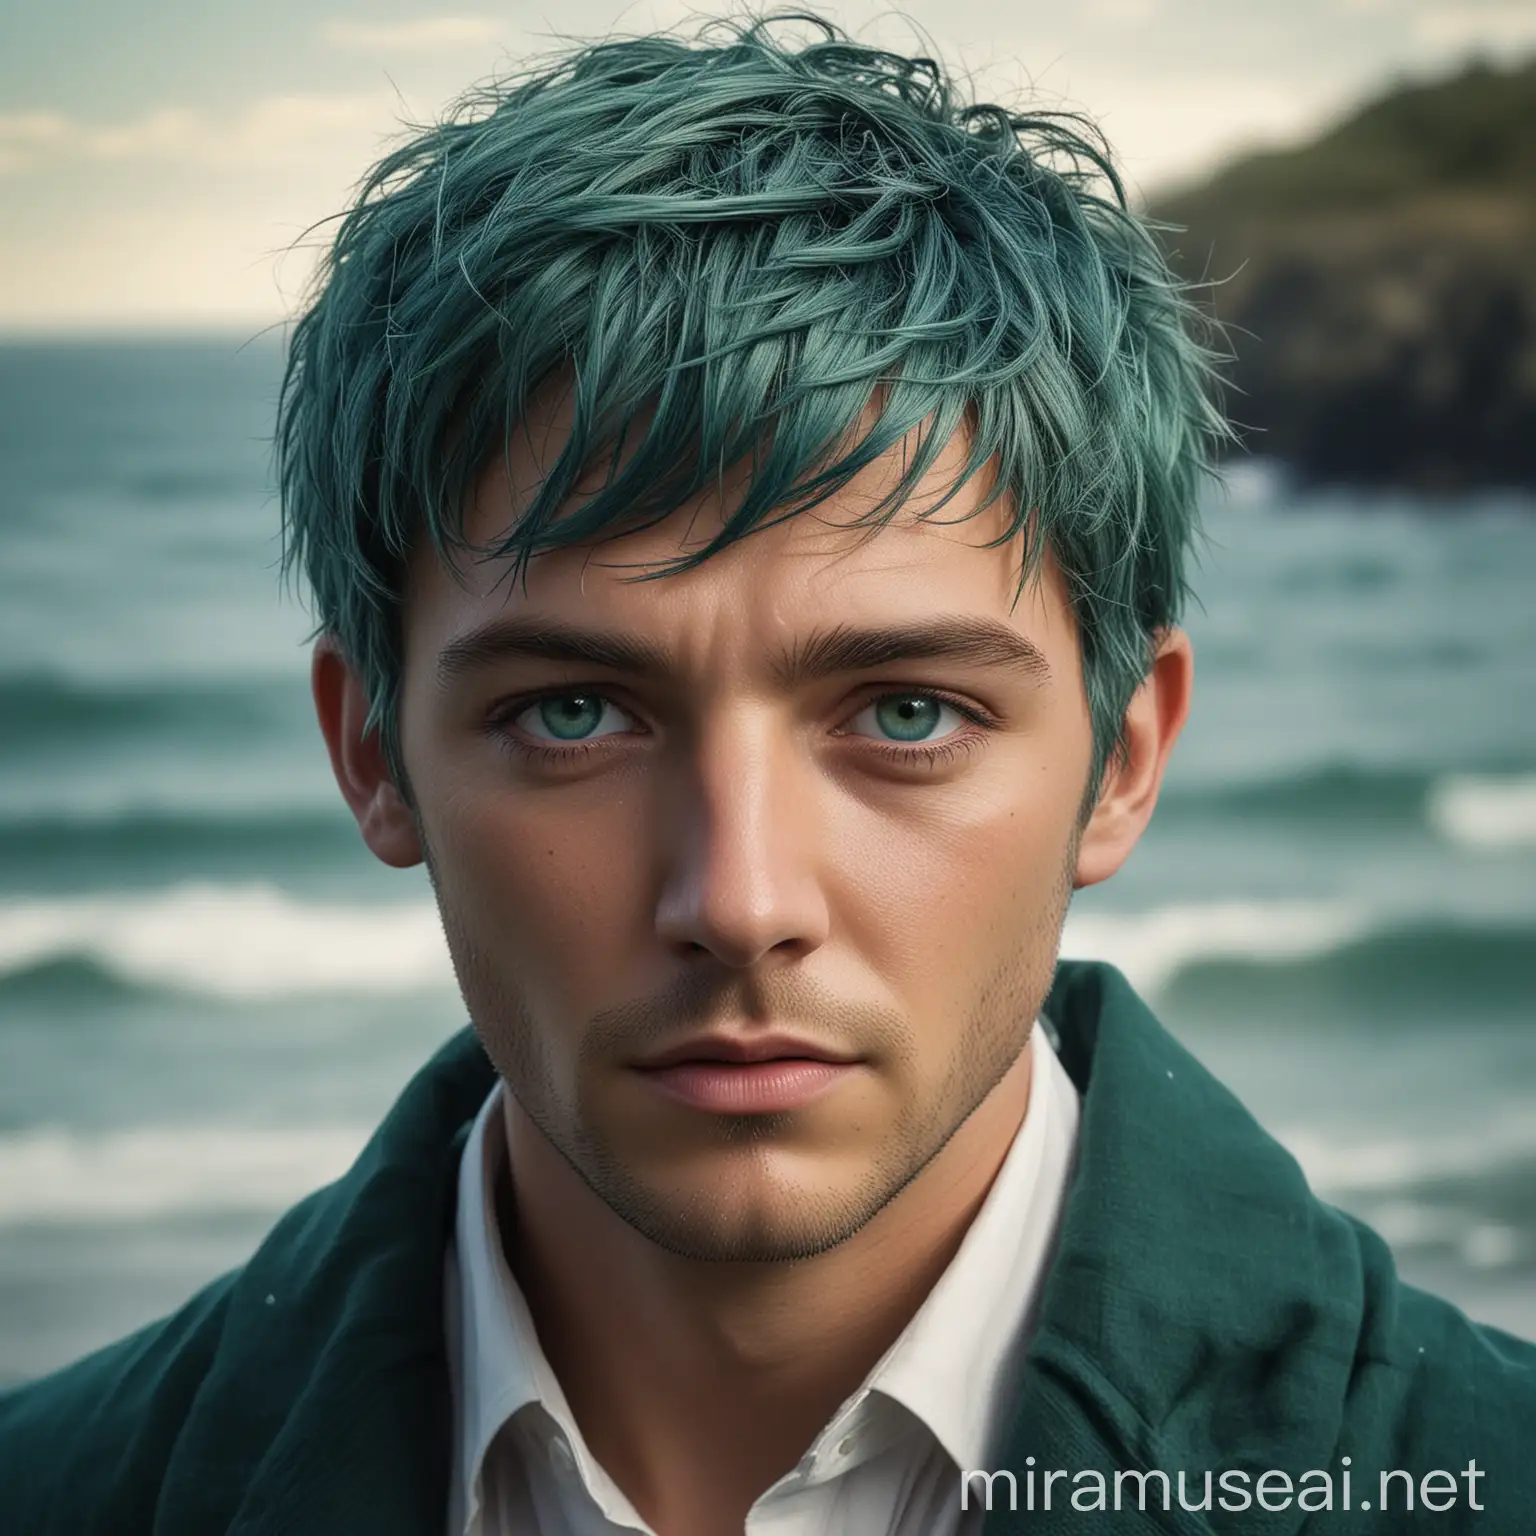 Mystical Wizard with SeaGreen Eyes and Flowing Blue Hair